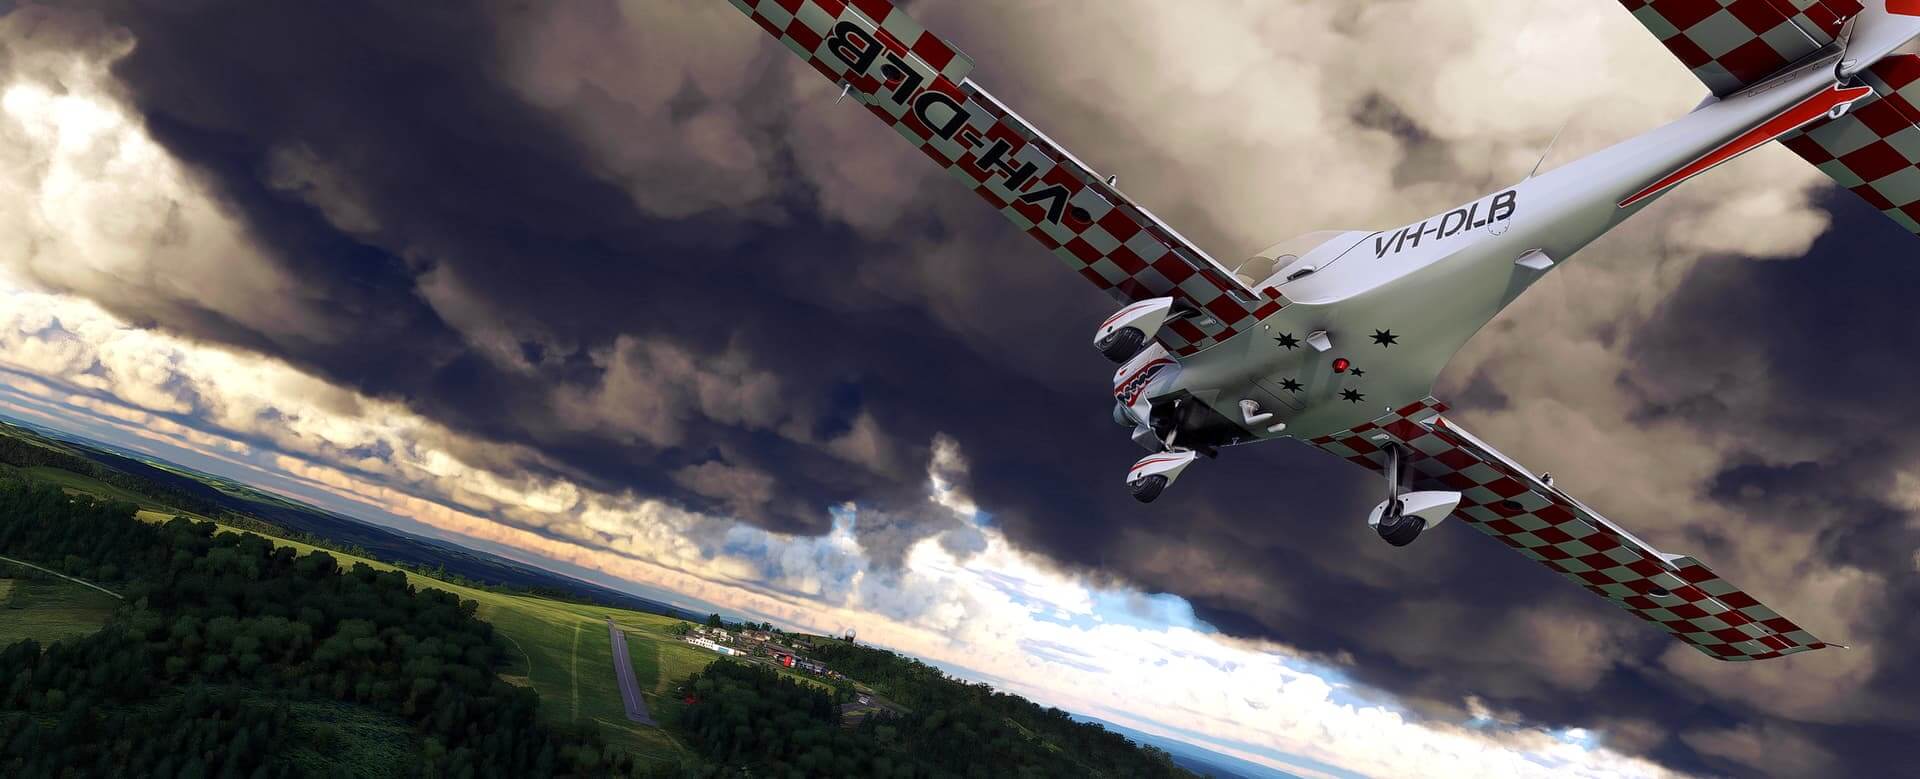 A low wing propeller aircraft in white and red checkerboard livery flies towards a thin runway, with trees either side. Above are grey and black storm clouds.